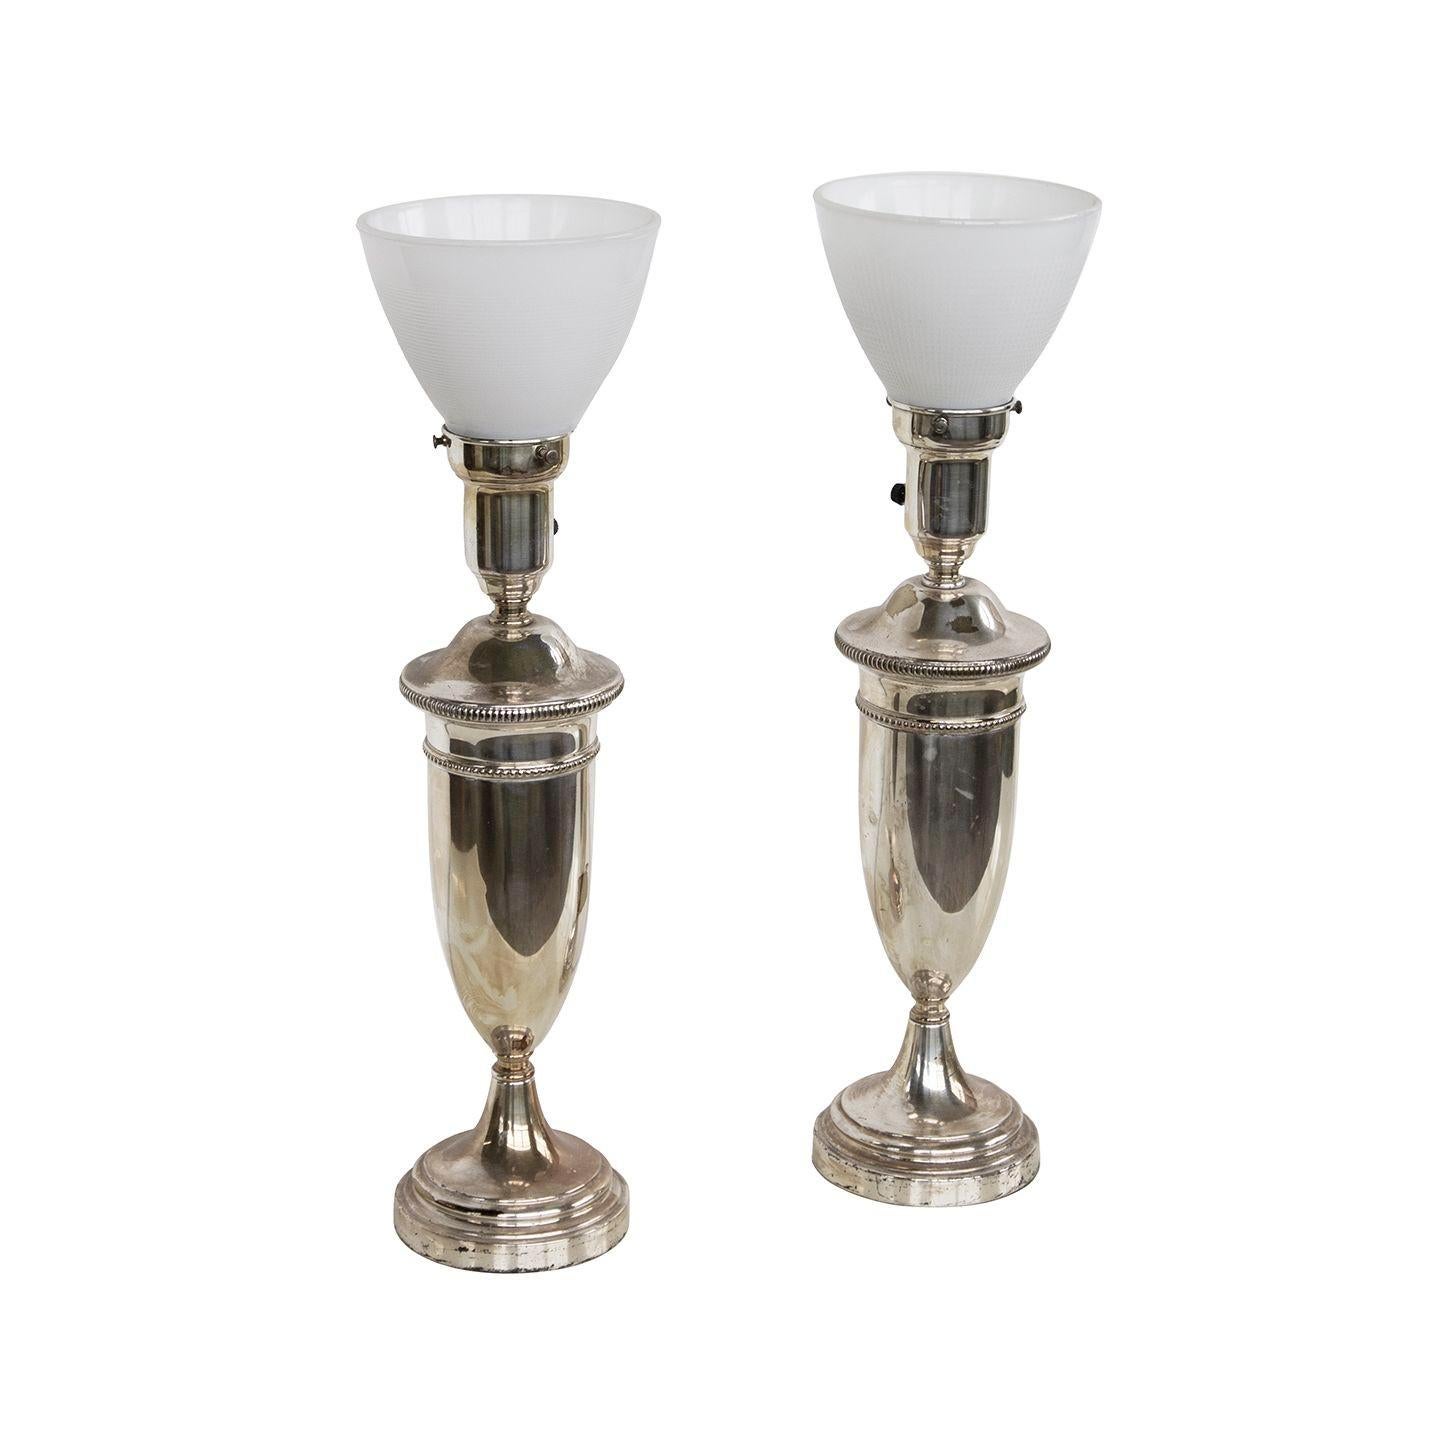 USA, 1960s
Pair of classical silverplate Lamps with glass diffusers. Felt lined base. Small to medium scale.
DIMENSIONS: 5